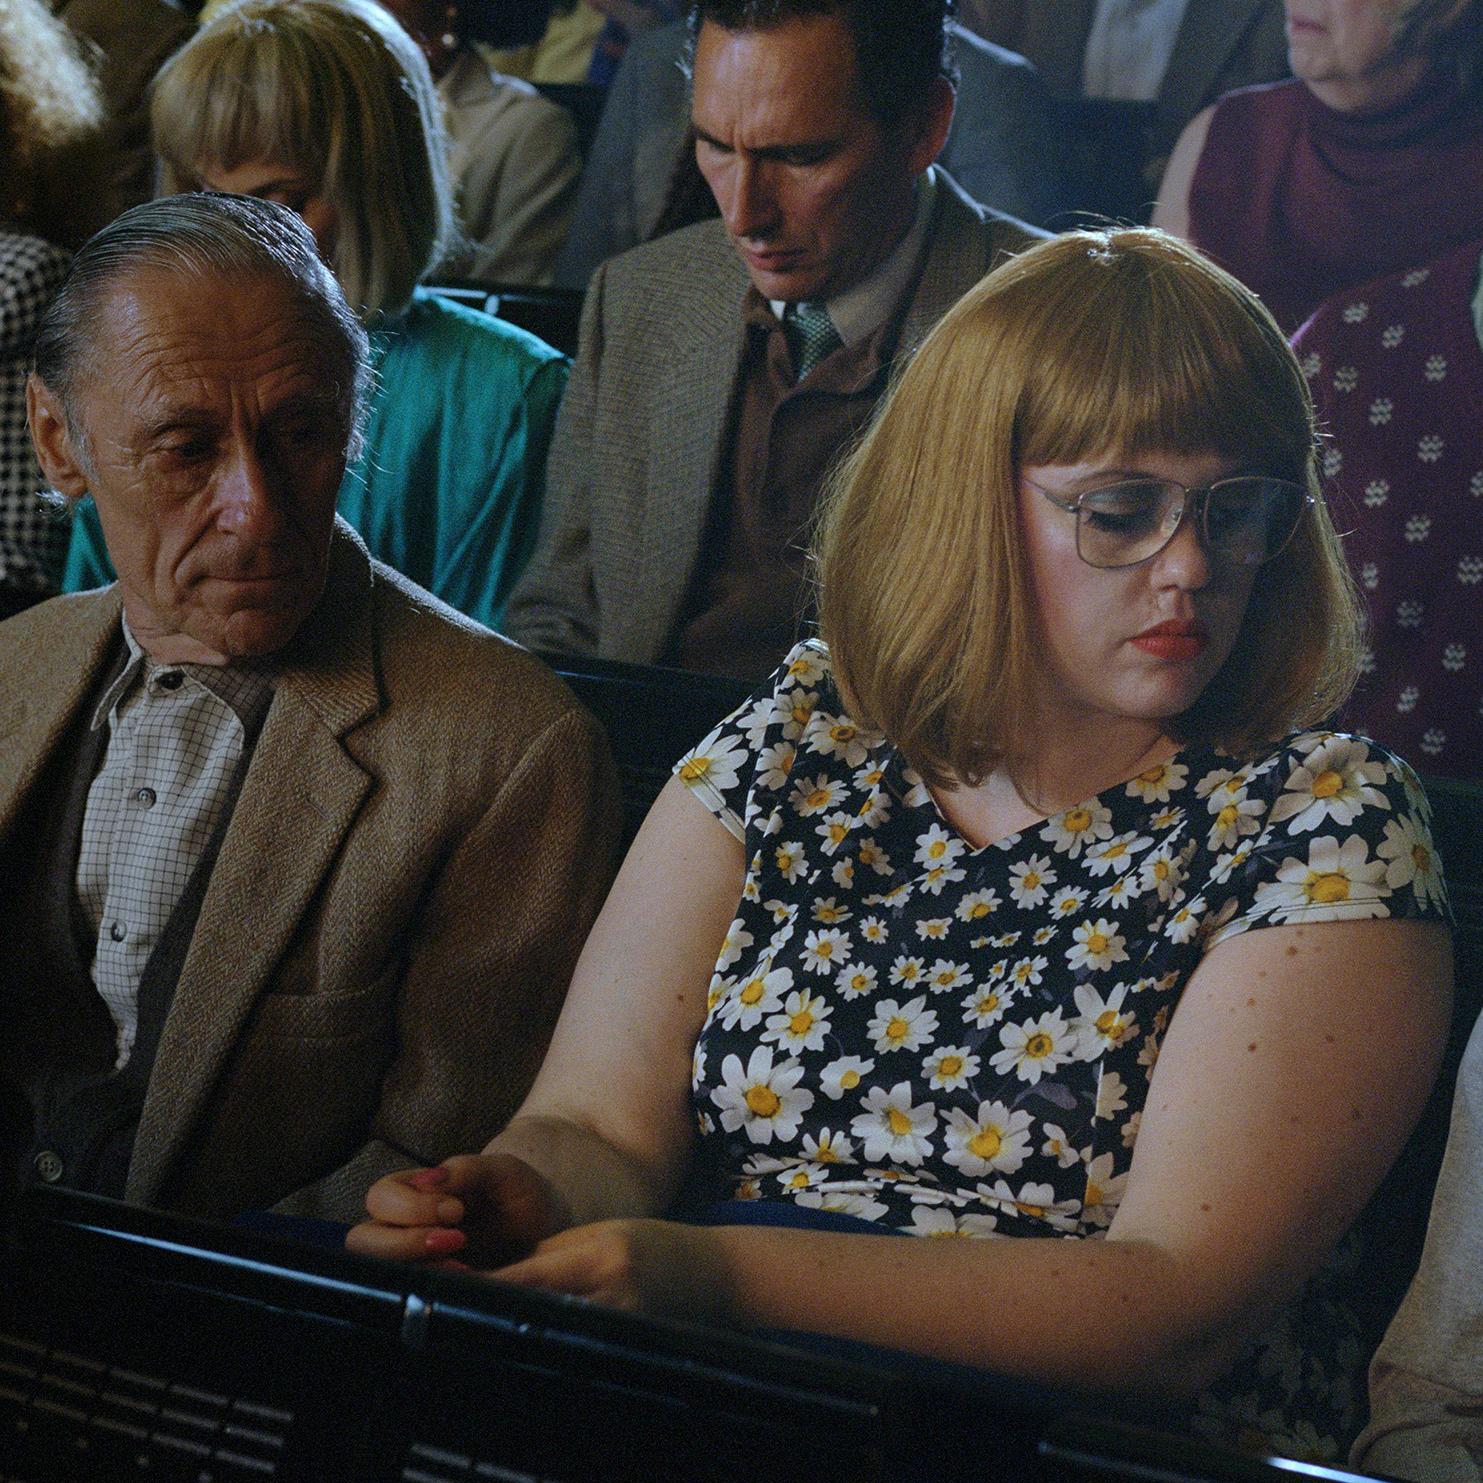 Orchestra East, Section B - Photograph by Alex Prager